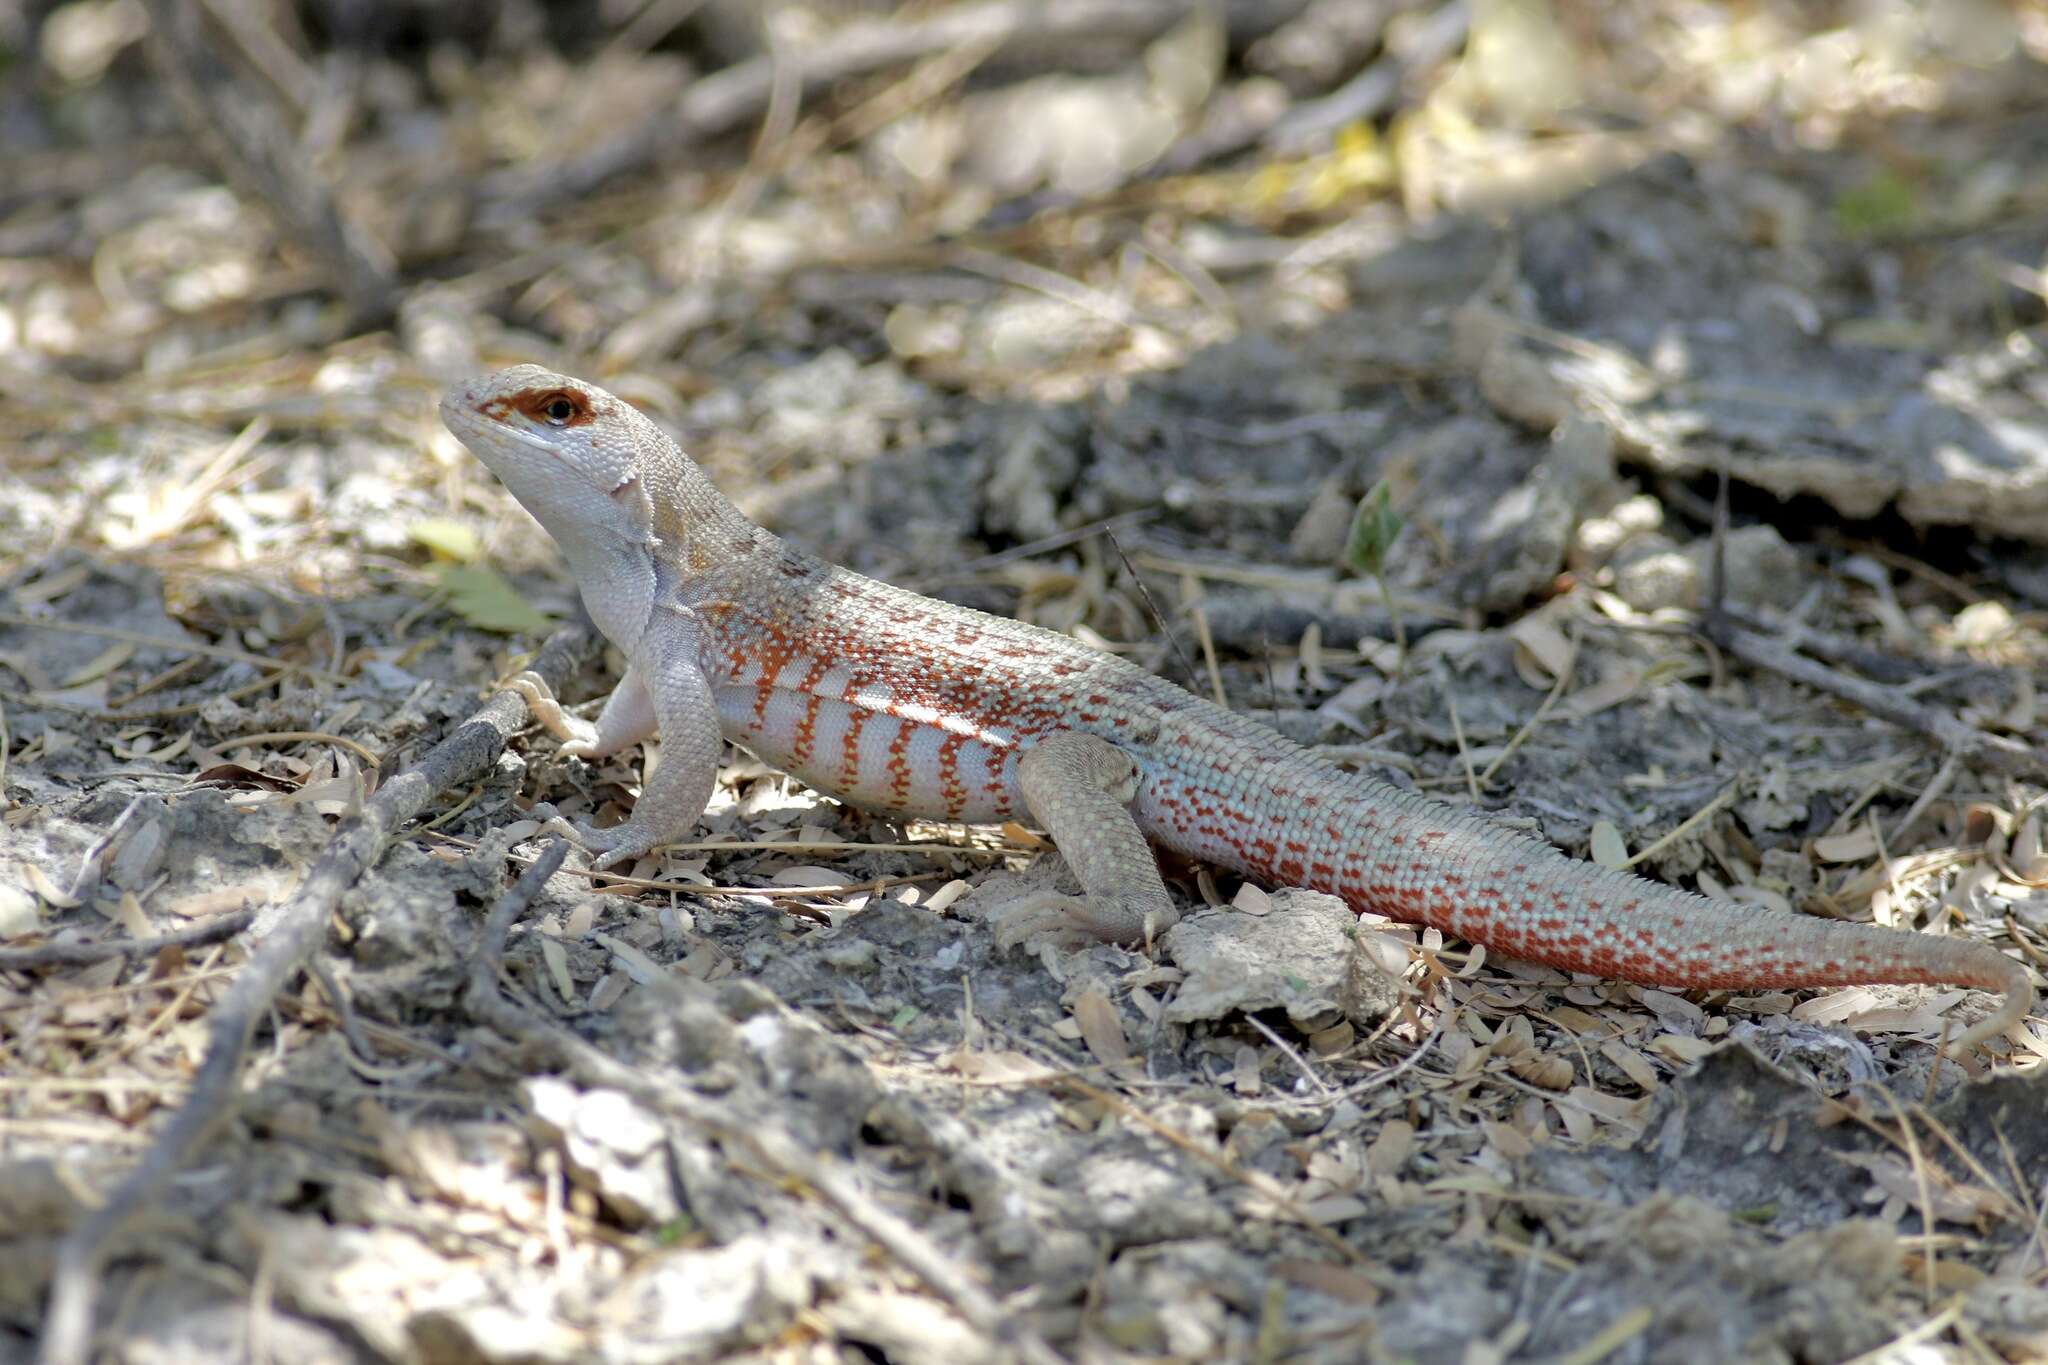 Image of Red-sided Curly-tailed Lizard